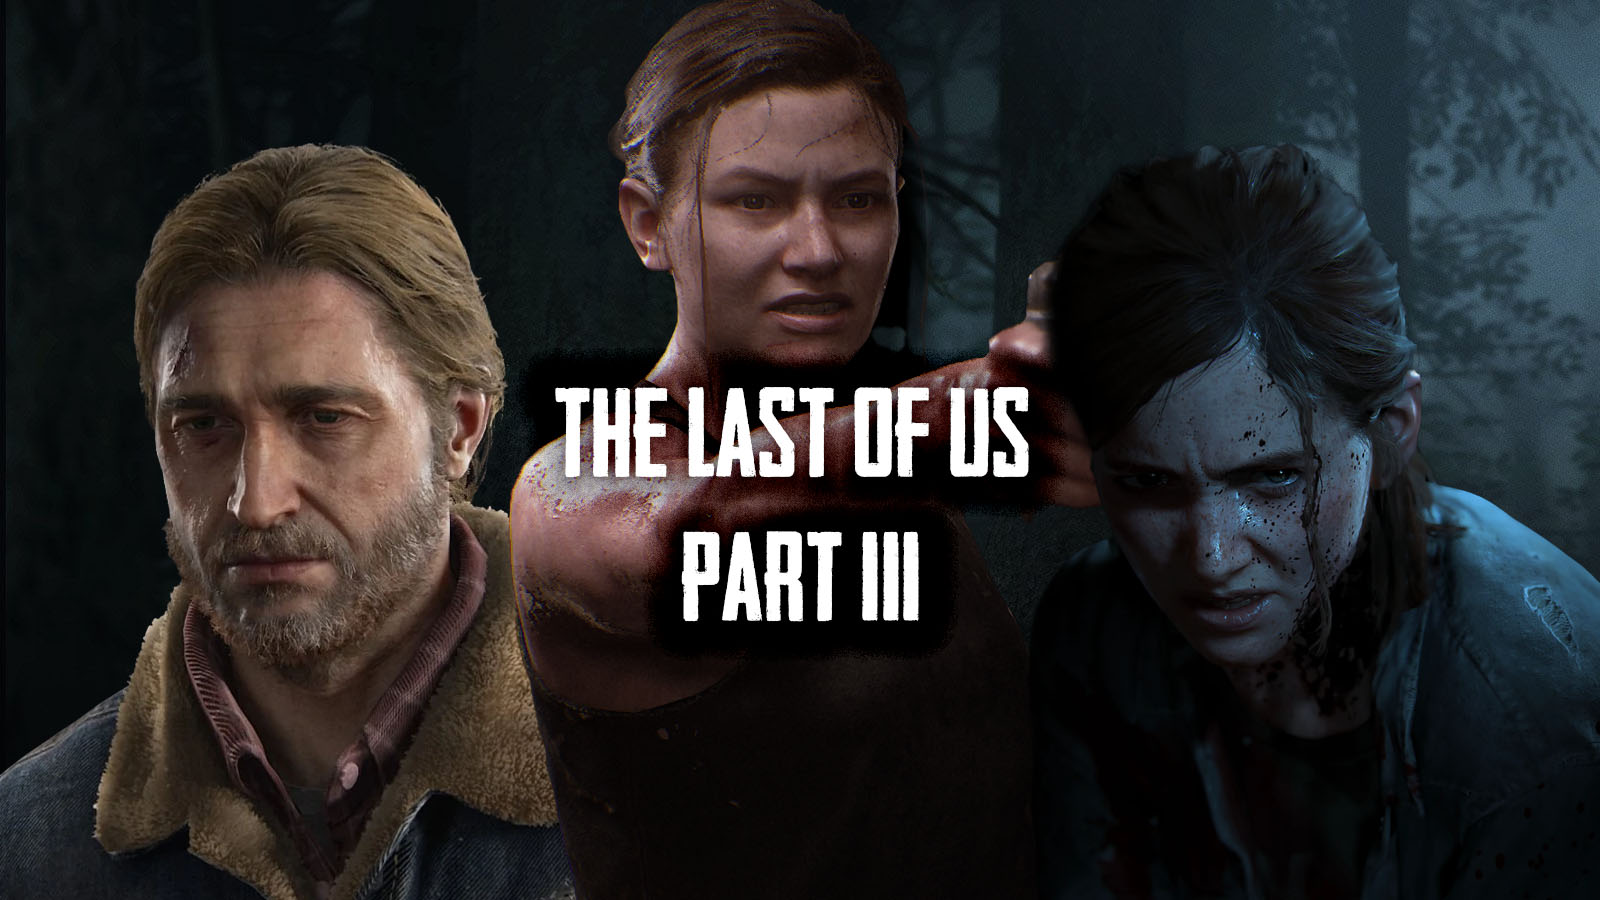 is the last of us part 1 open world